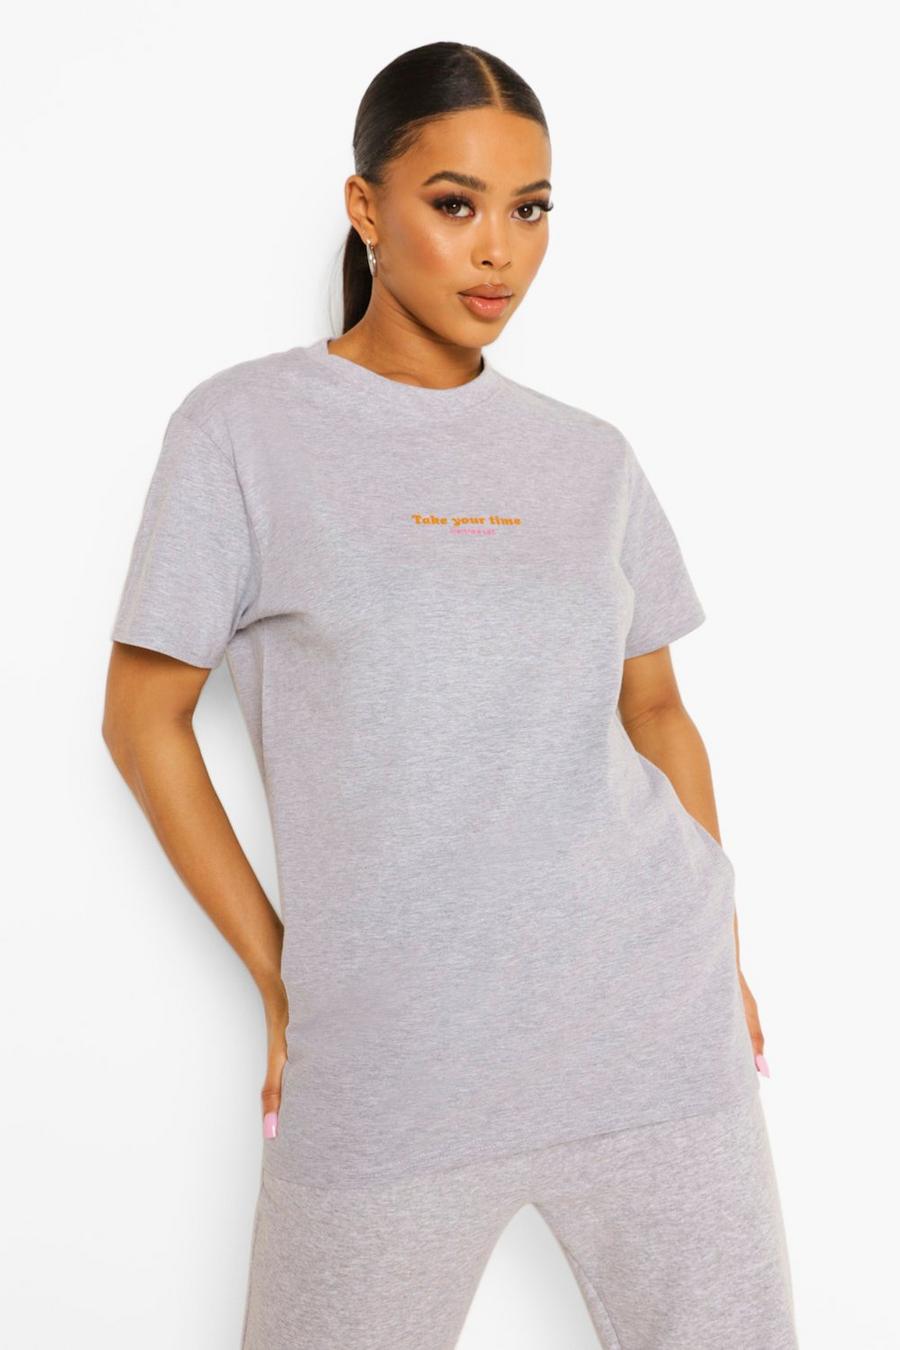 Grey marl Oversized Take Your Time T-Shirt image number 1